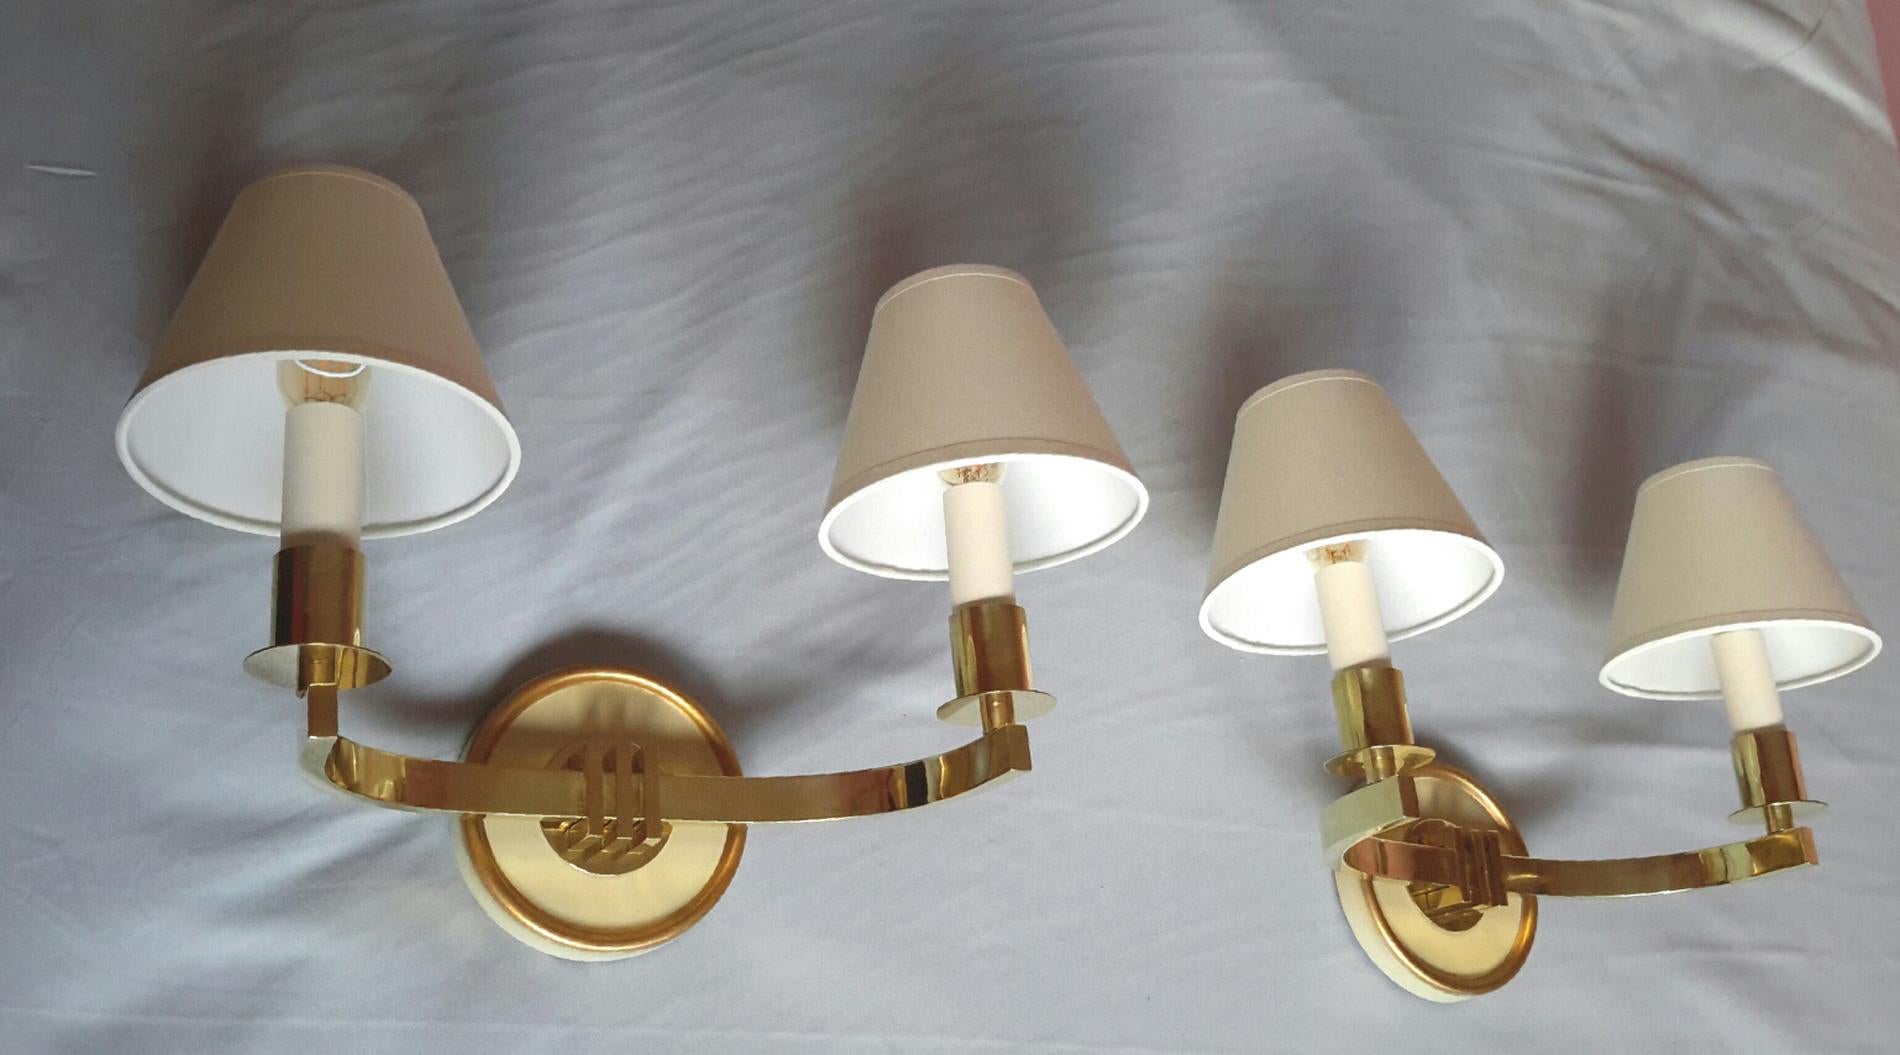 Chic Pair of French Mid-Century Modern Wall Sconces, 1950s For Sale 4